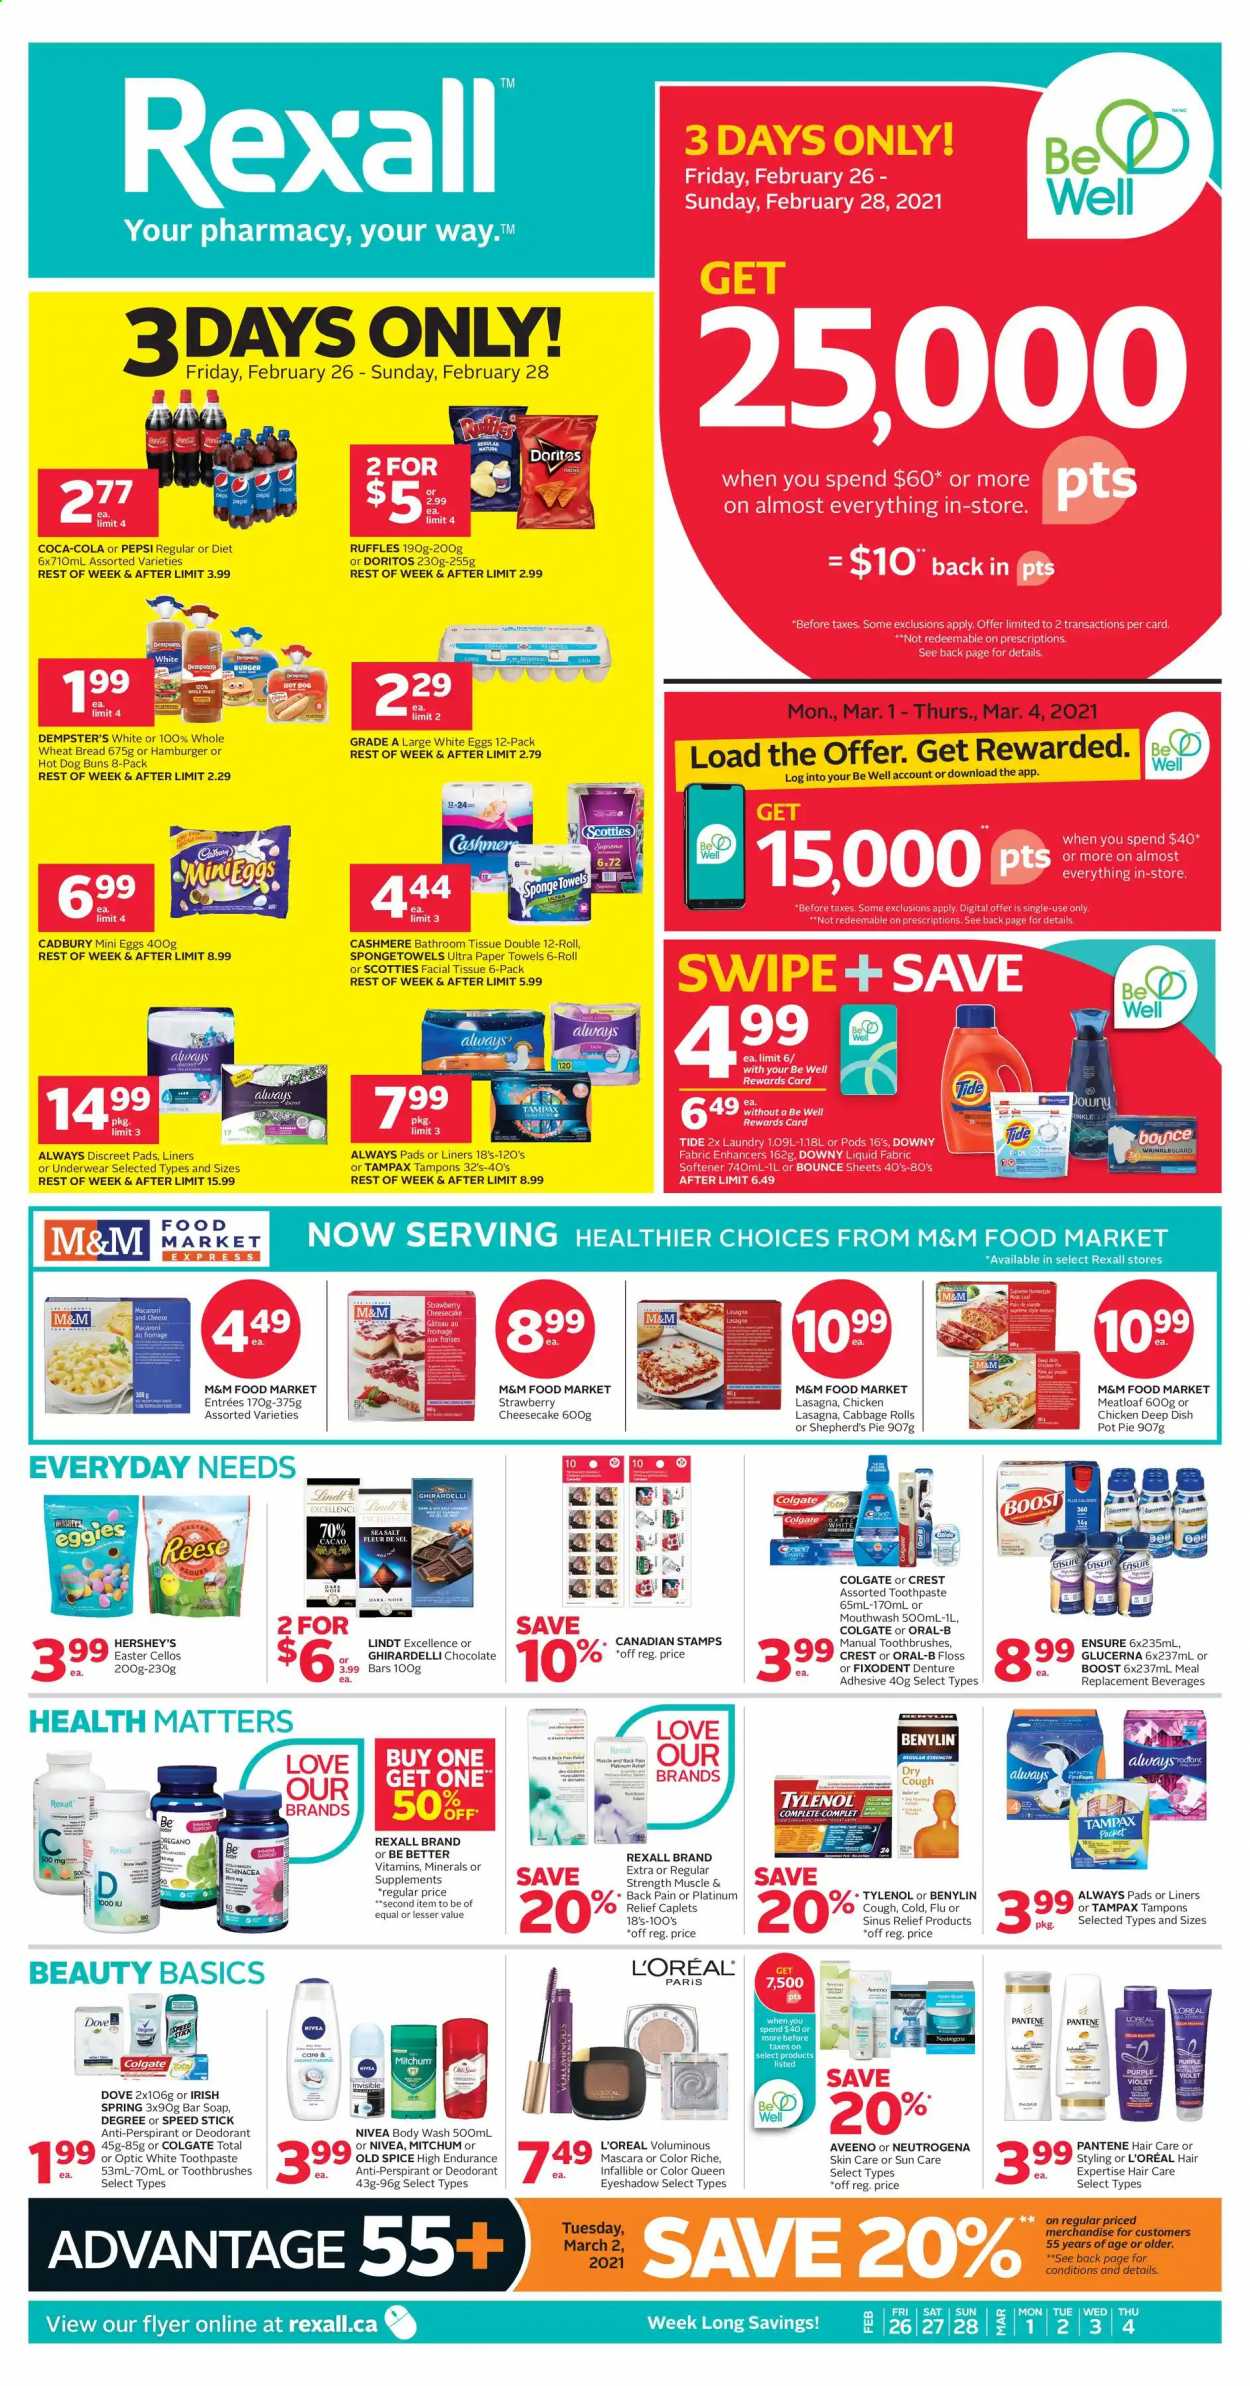 thumbnail - Rexall Flyer - February 26, 2021 - March 04, 2021 - Sales products - chocolate, Hershey's, Cadbury, Ghirardelli, Doritos, Ruffles, sea salt, cabbage, spice, Coca-Cola, Pepsi, Boost, Aveeno, bath tissue, kitchen towels, paper towels, Tide, fabric softener, Bounce, Downy Laundry, body wash, soap bar, soap, toothpaste, mouthwash, Fixodent, Crest, Always pads, sanitary pads, Always Discreet, tampons, L’Oréal, Infinity, anti-perspirant, Speed Stick, eyeshadow, sponge, pot, pain relief, Tylenol, Glucerna, Benylin, mascara, Neutrogena, Tampax, Pantene, Nivea, Old Spice, Oral-B, M&M's, deodorant. Page 1.